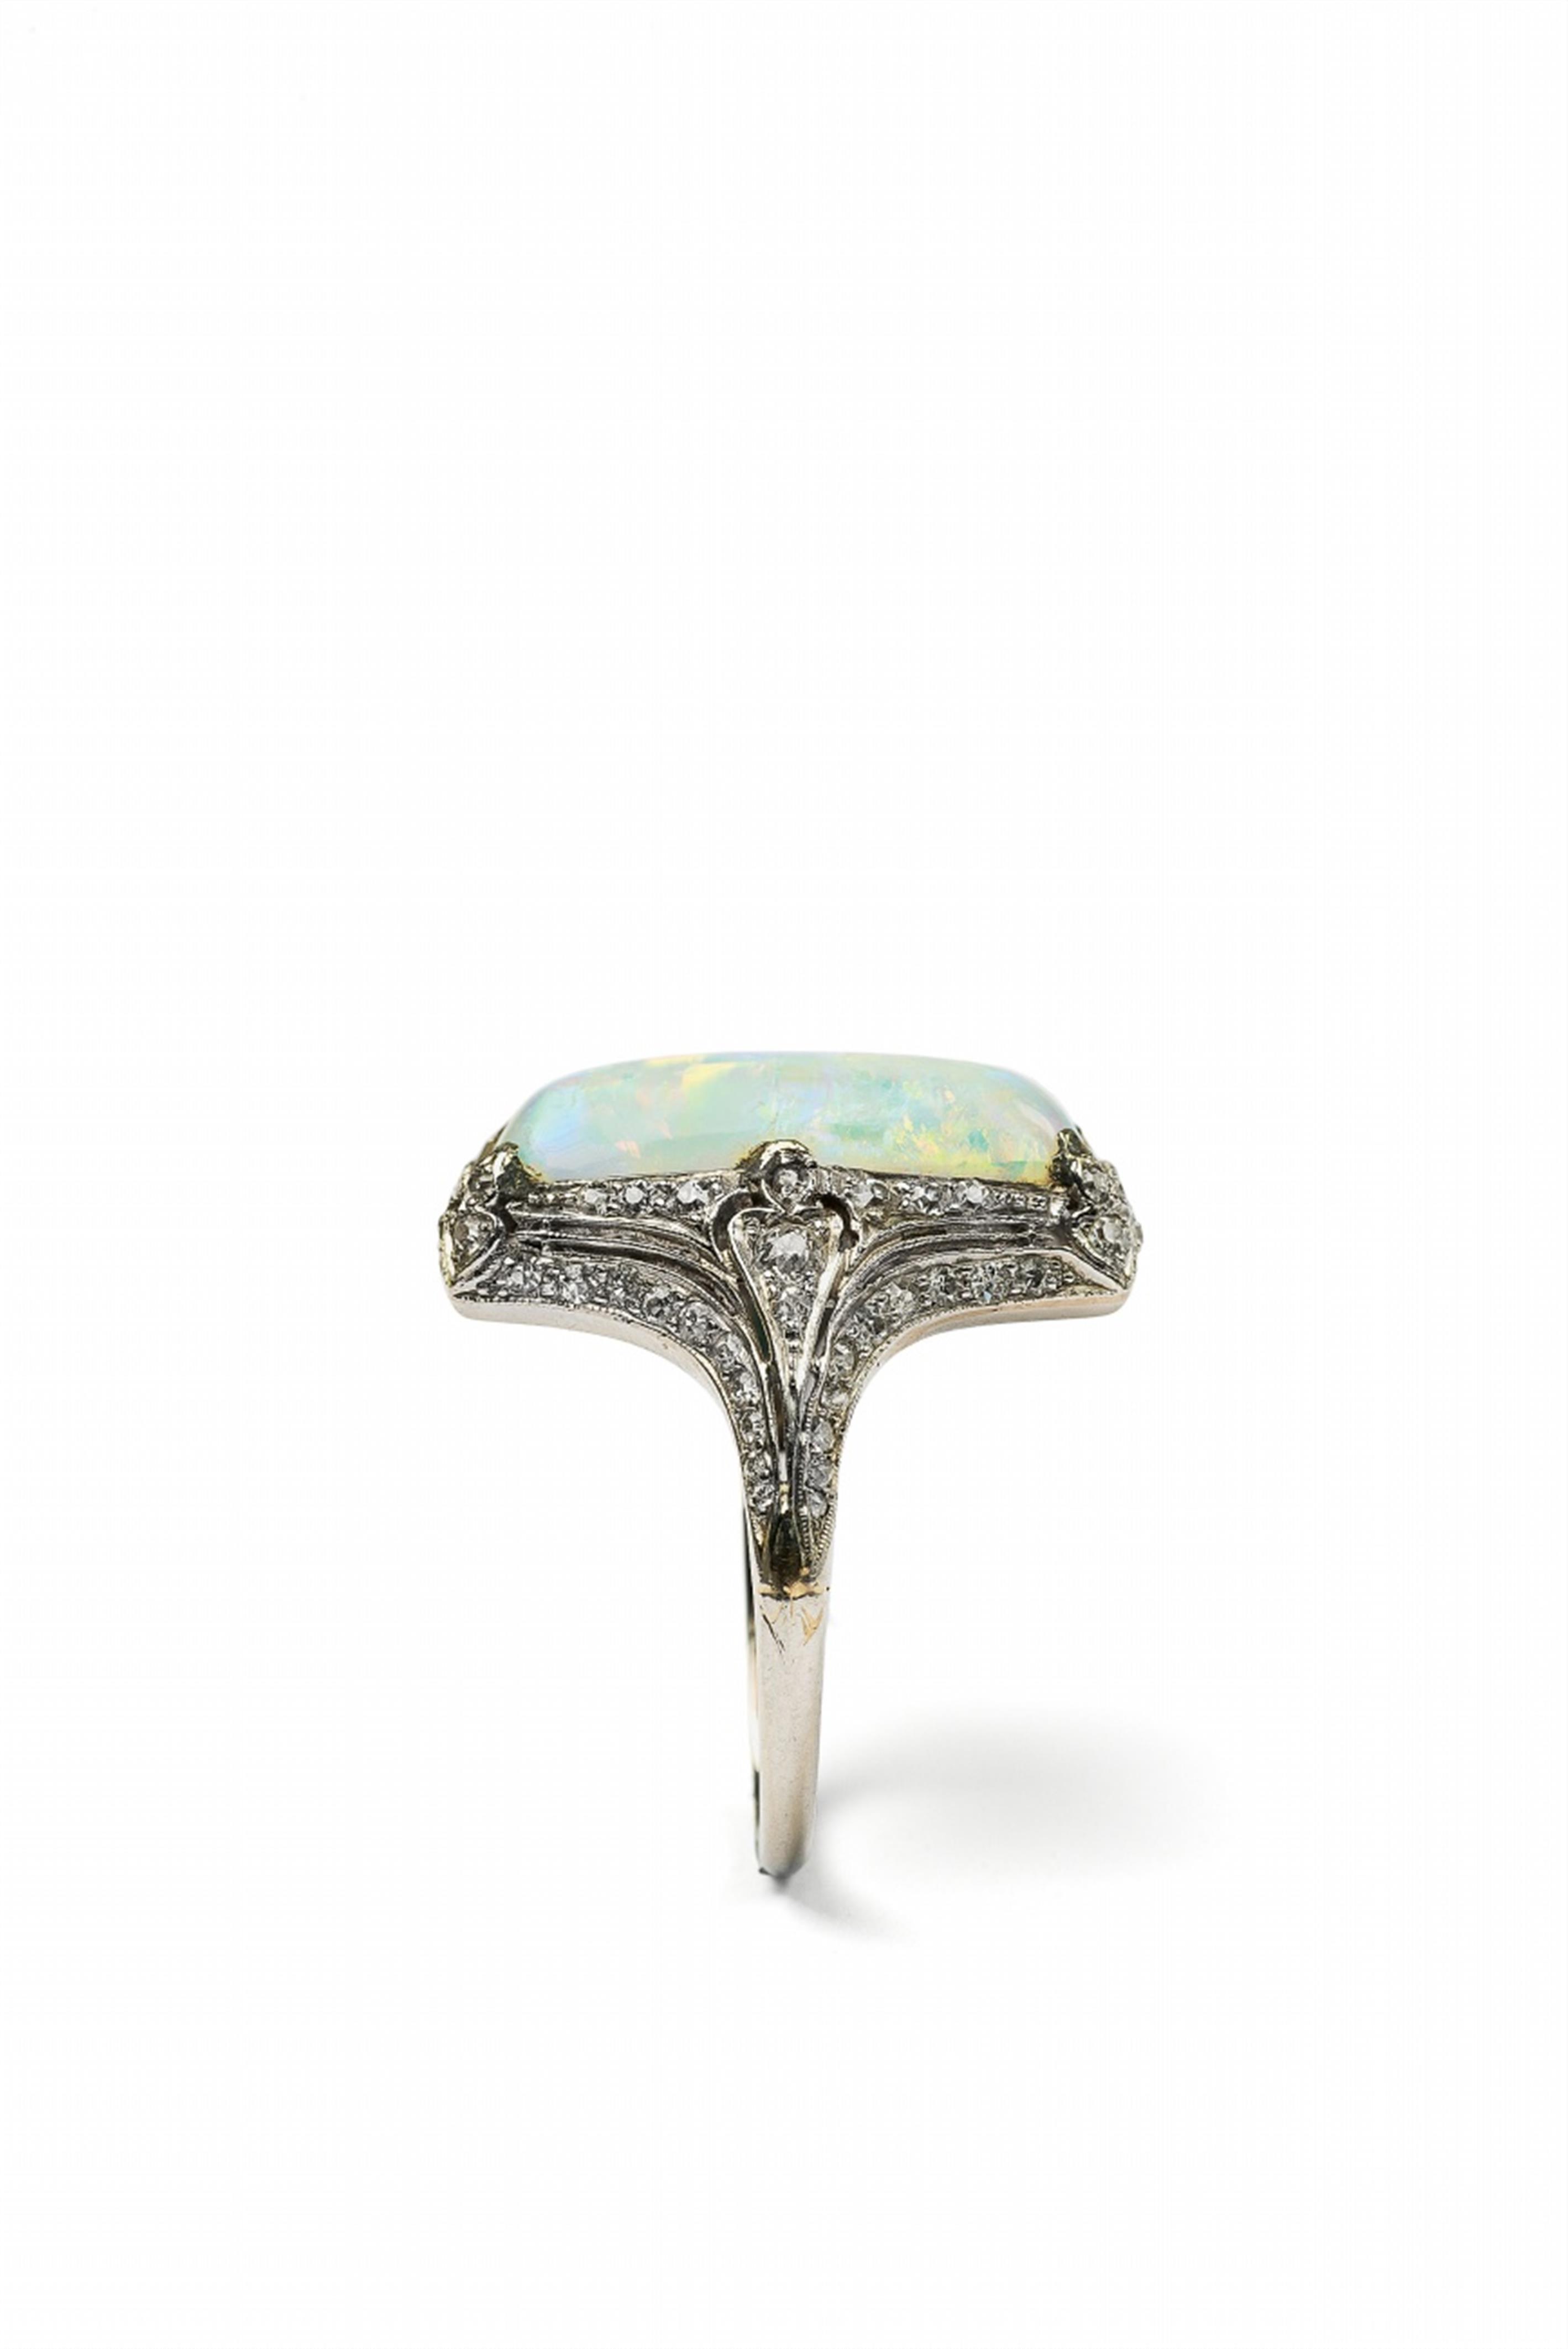 A Belle Epoque platinum and opal ring - image-2